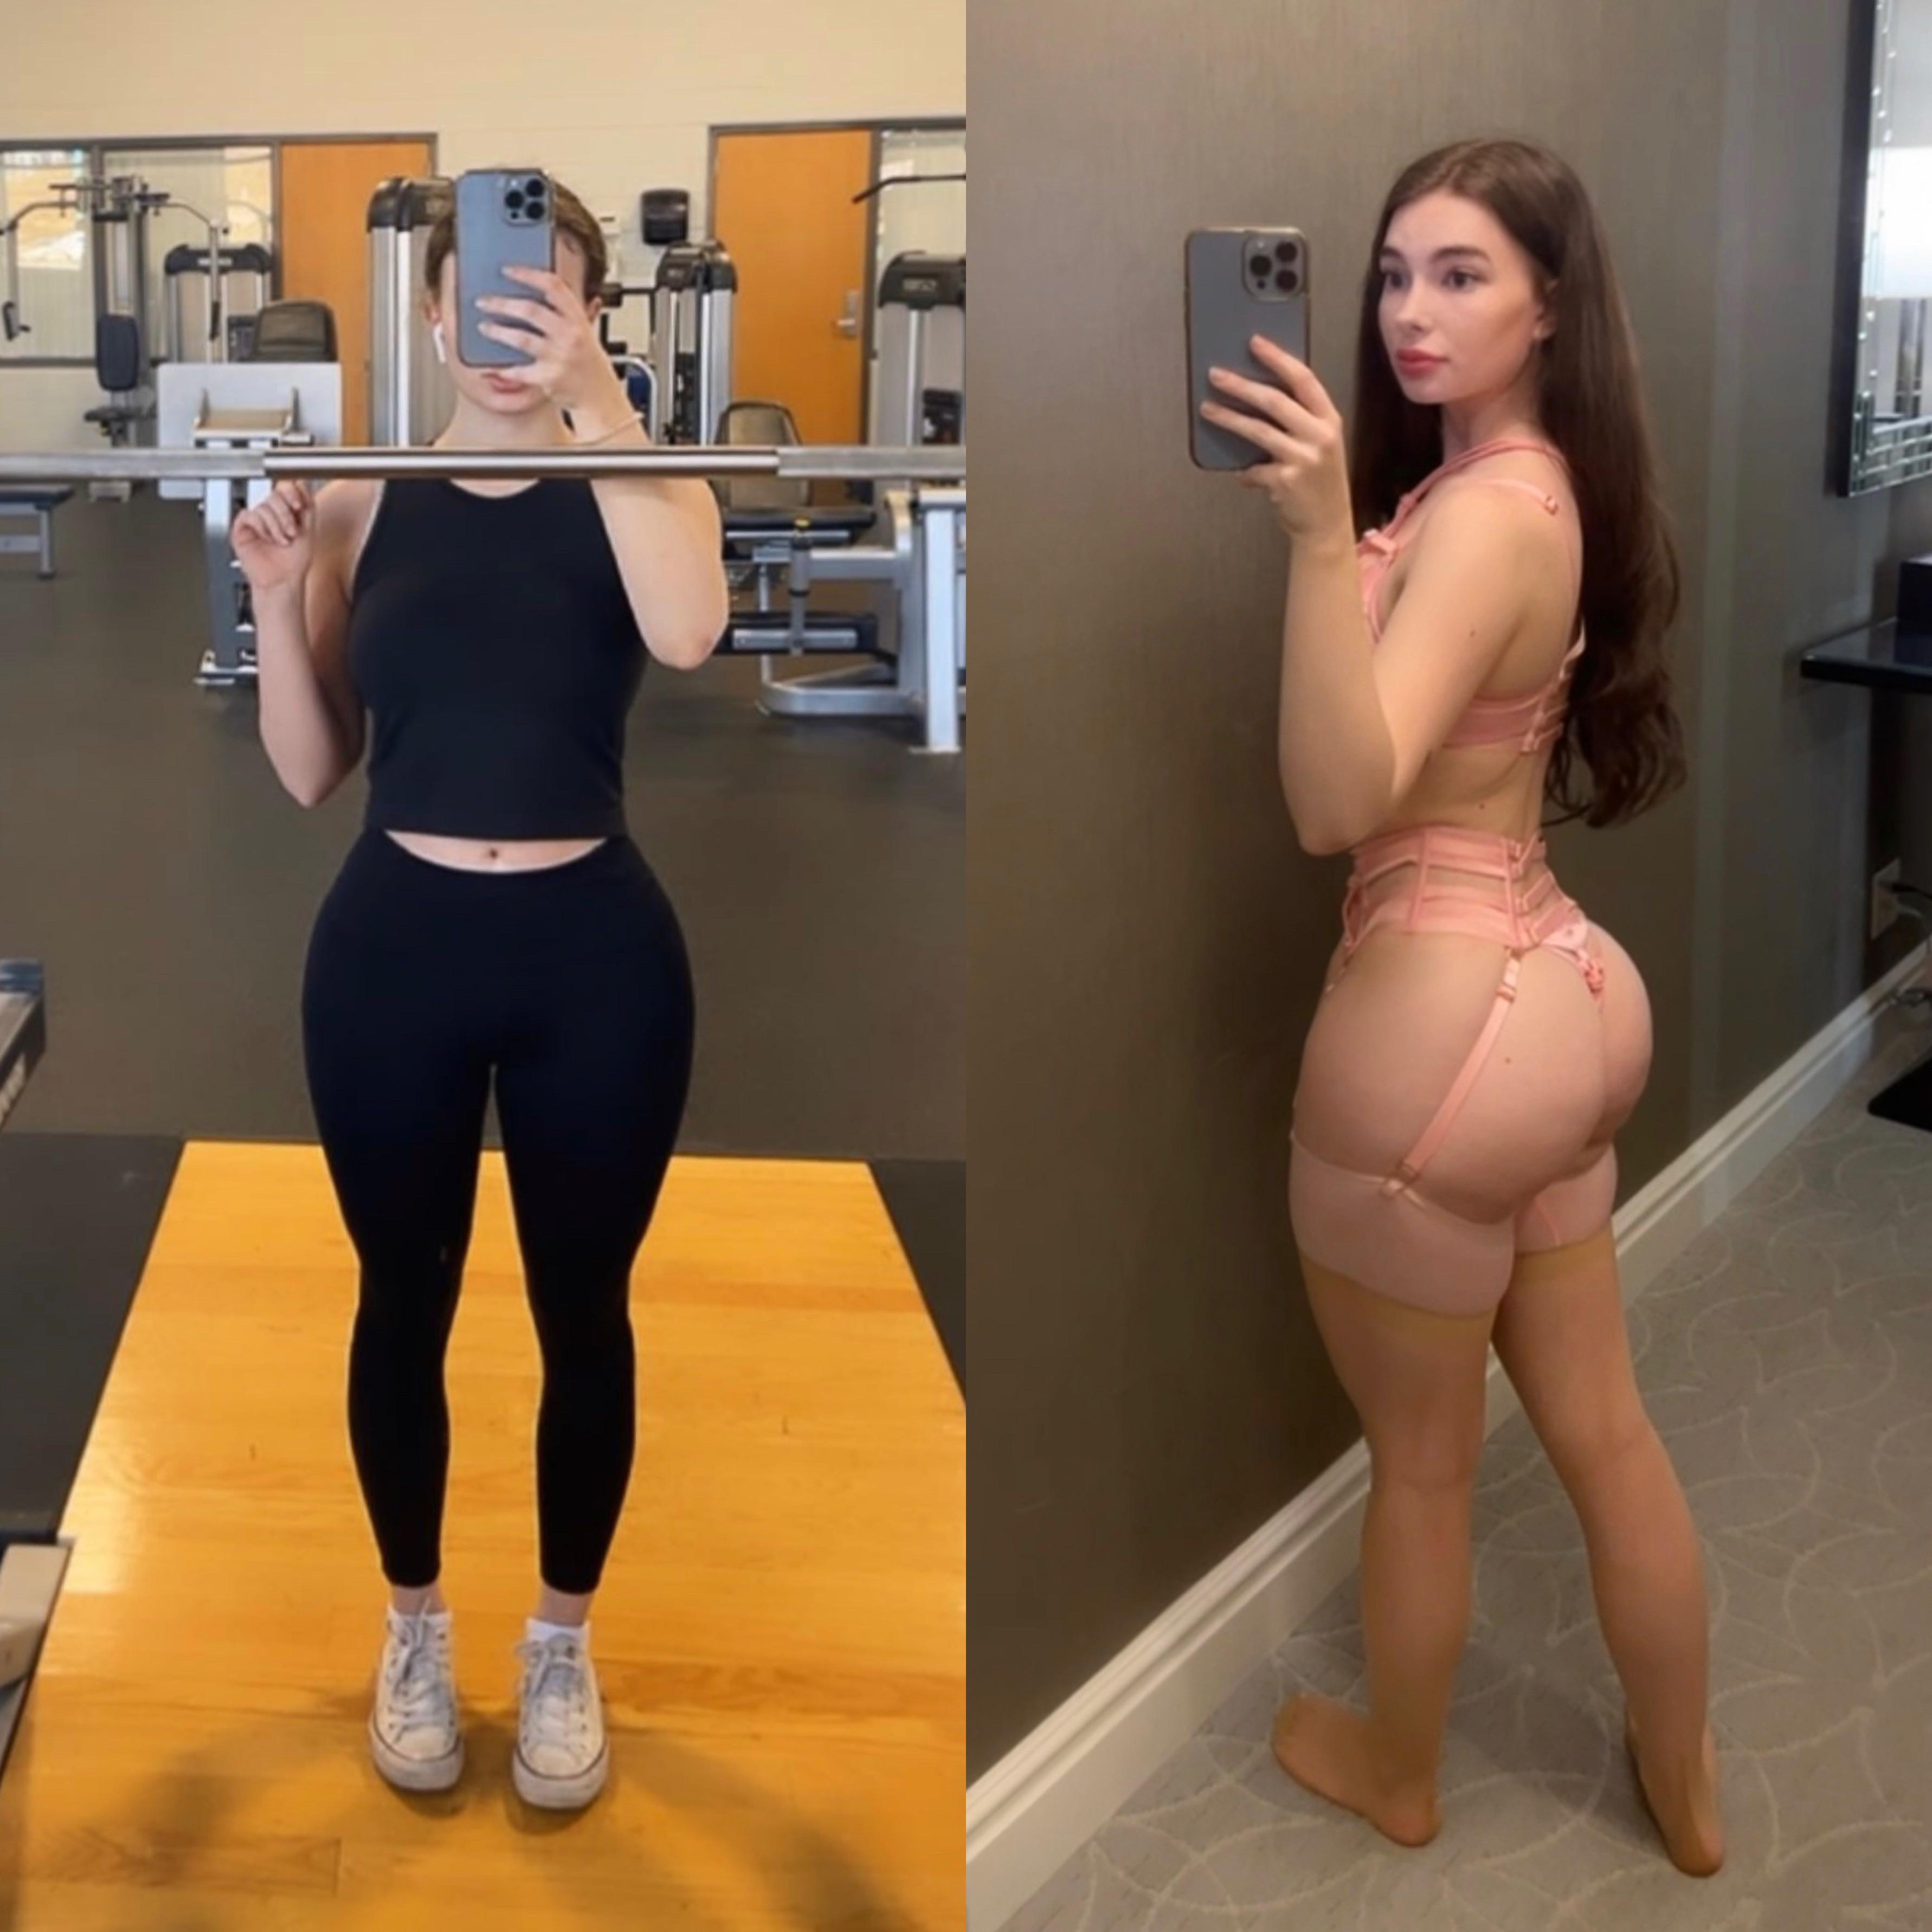 What the gym sees vs what Reddit sees